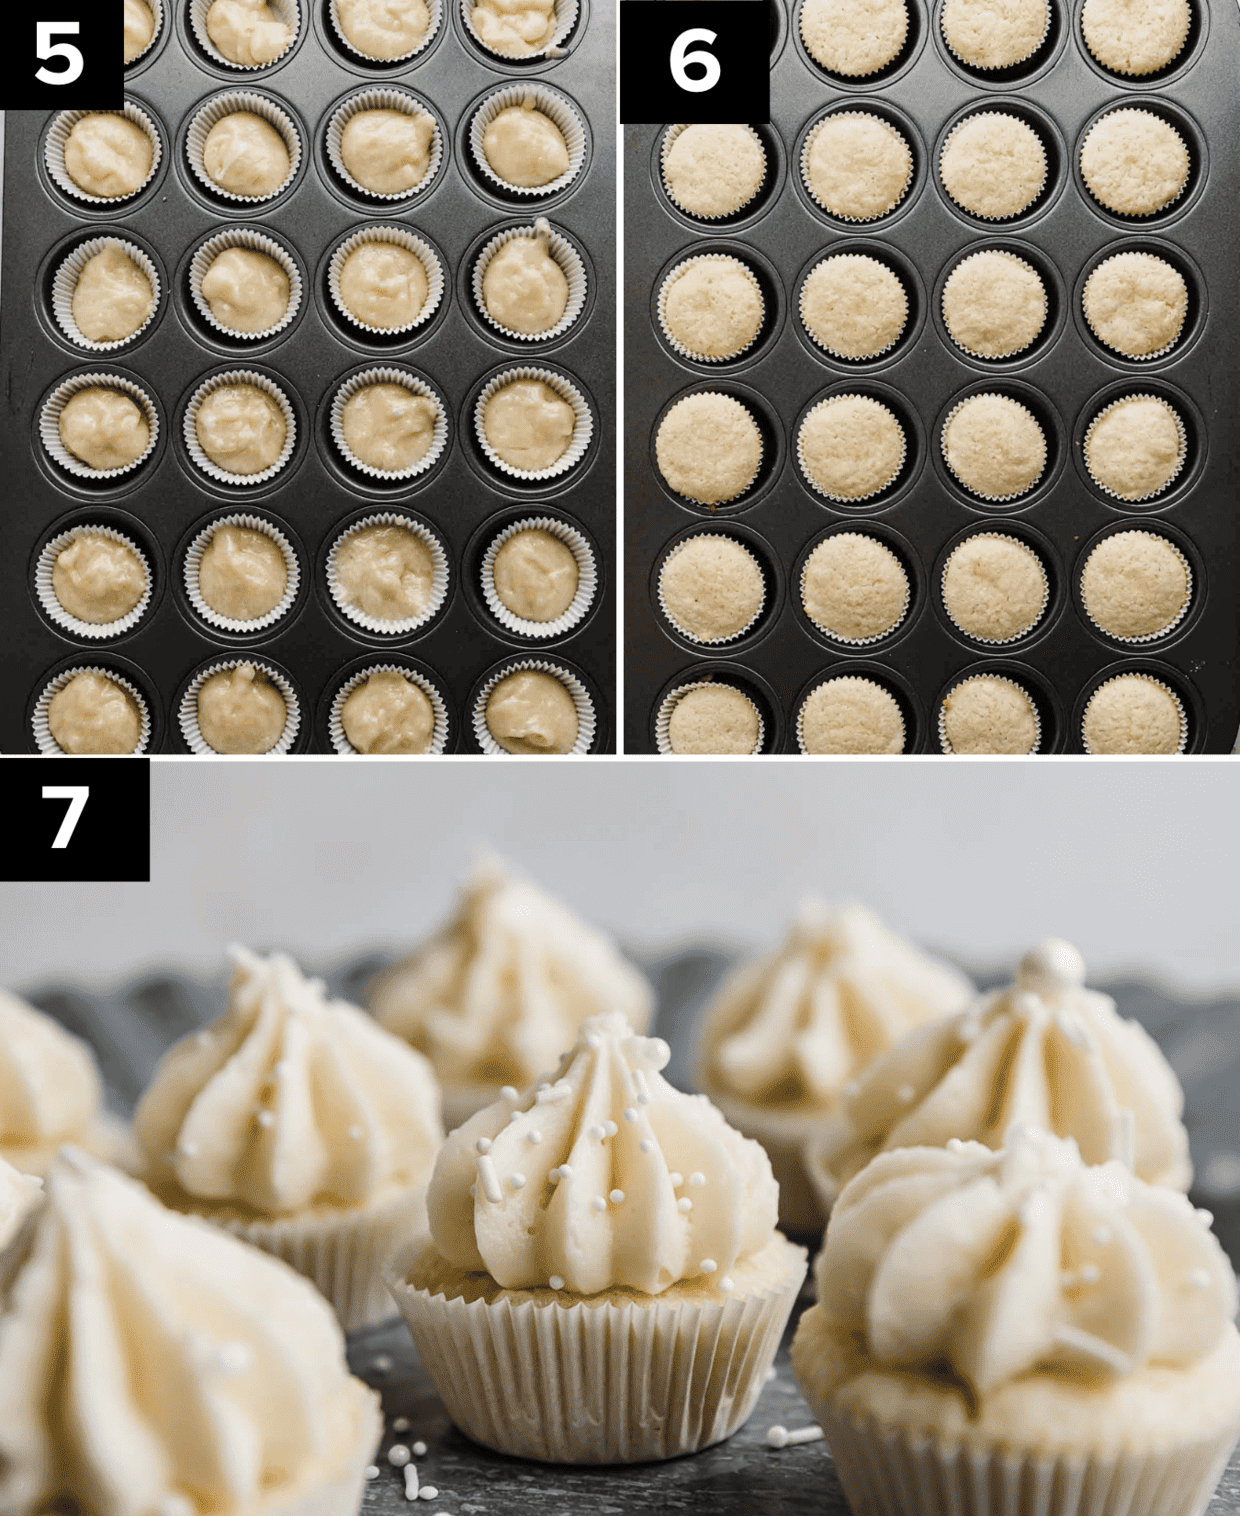 Three images, top left image is unbaked Mini Cupcakes in a mini cupcake tin, top right photo is baked mini vanilla cupcakes, bottom photo is frosted Mini Cupcakes.